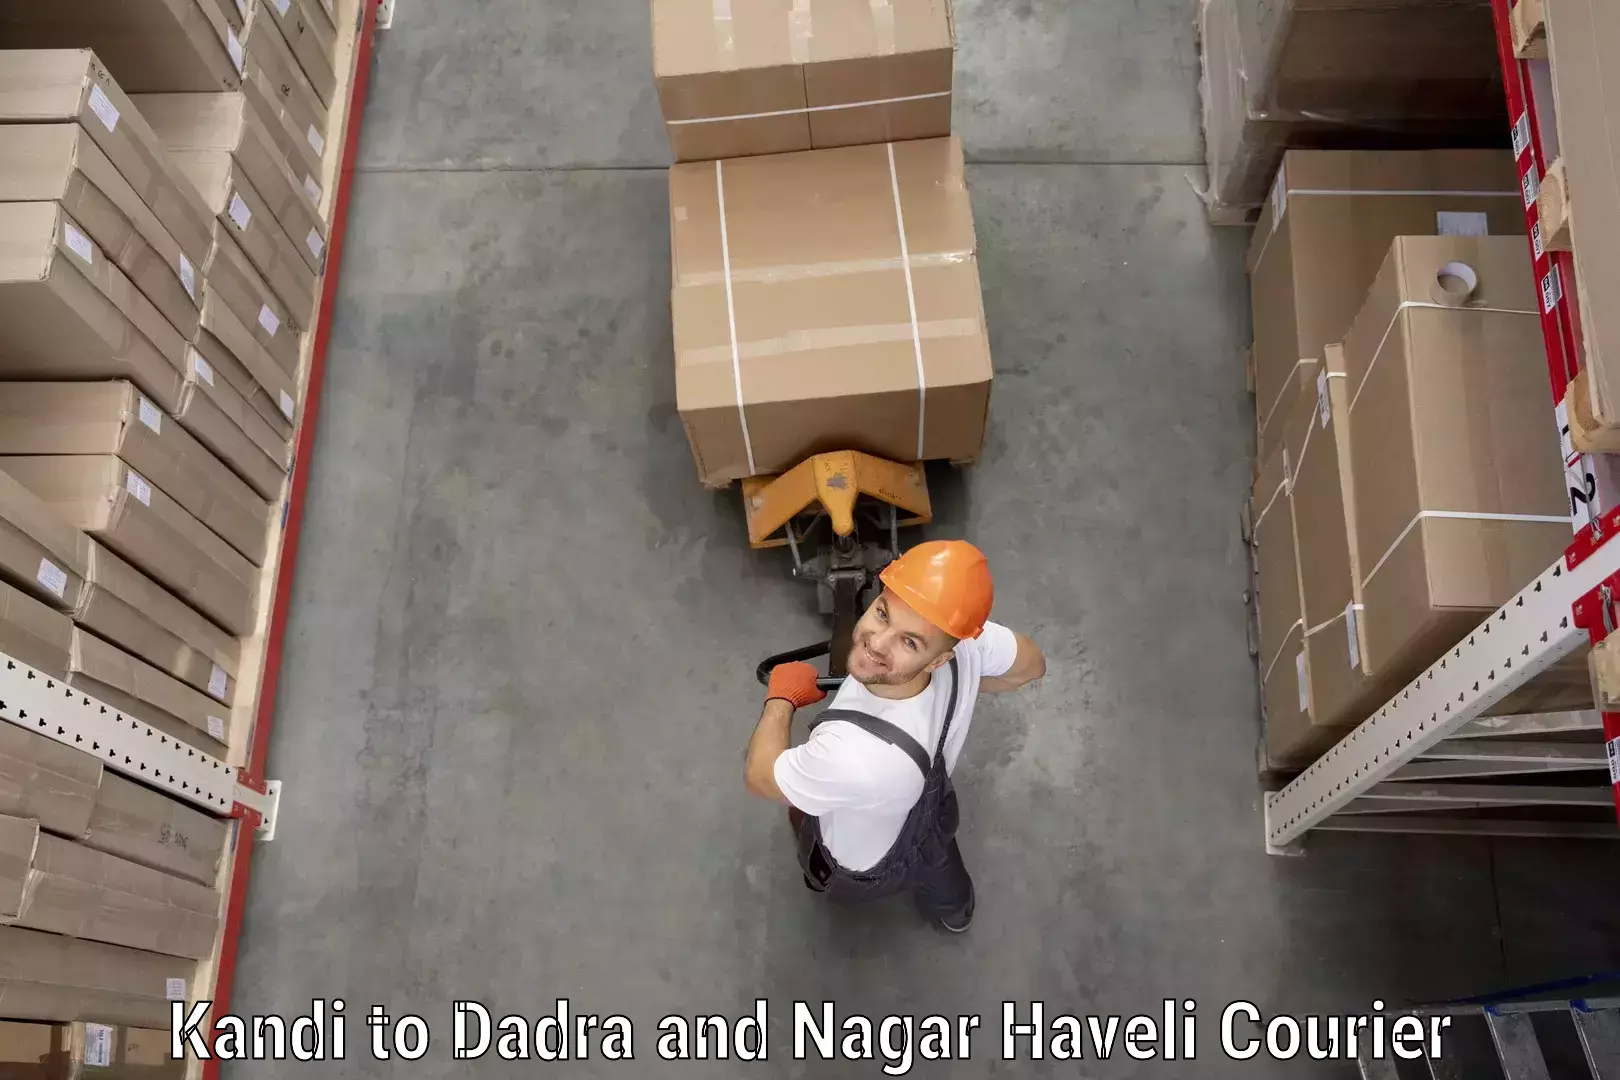 Parcel service for businesses Kandi to Dadra and Nagar Haveli